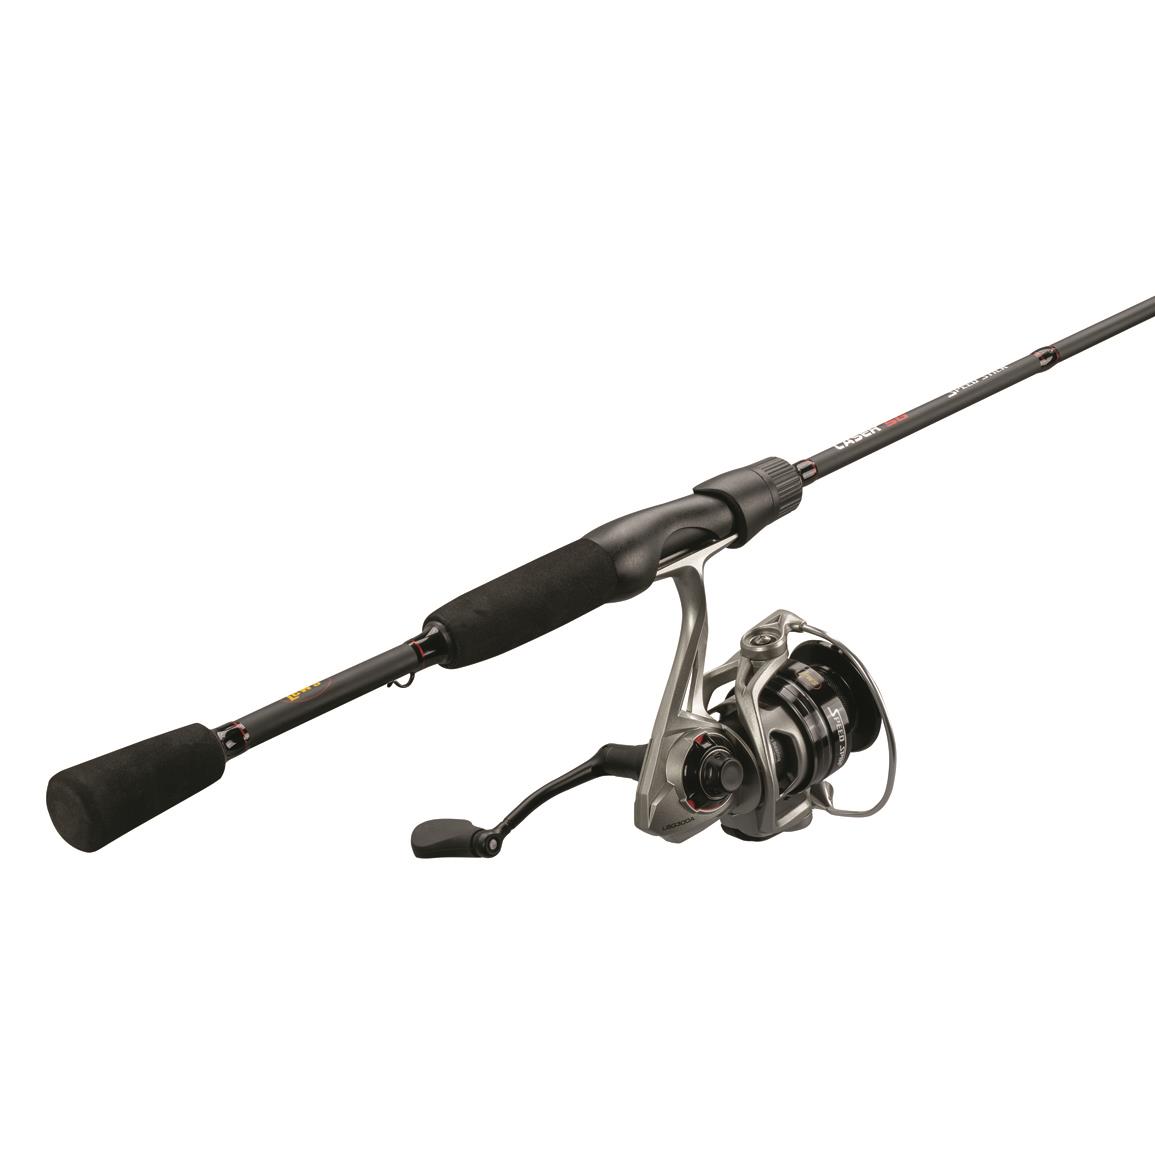 13 Fishing Code NX Spinning Combo, 7'1 Length, Medium Power, 3000 Reel Size  - 729833, Spinning Combos at Sportsman's Guide